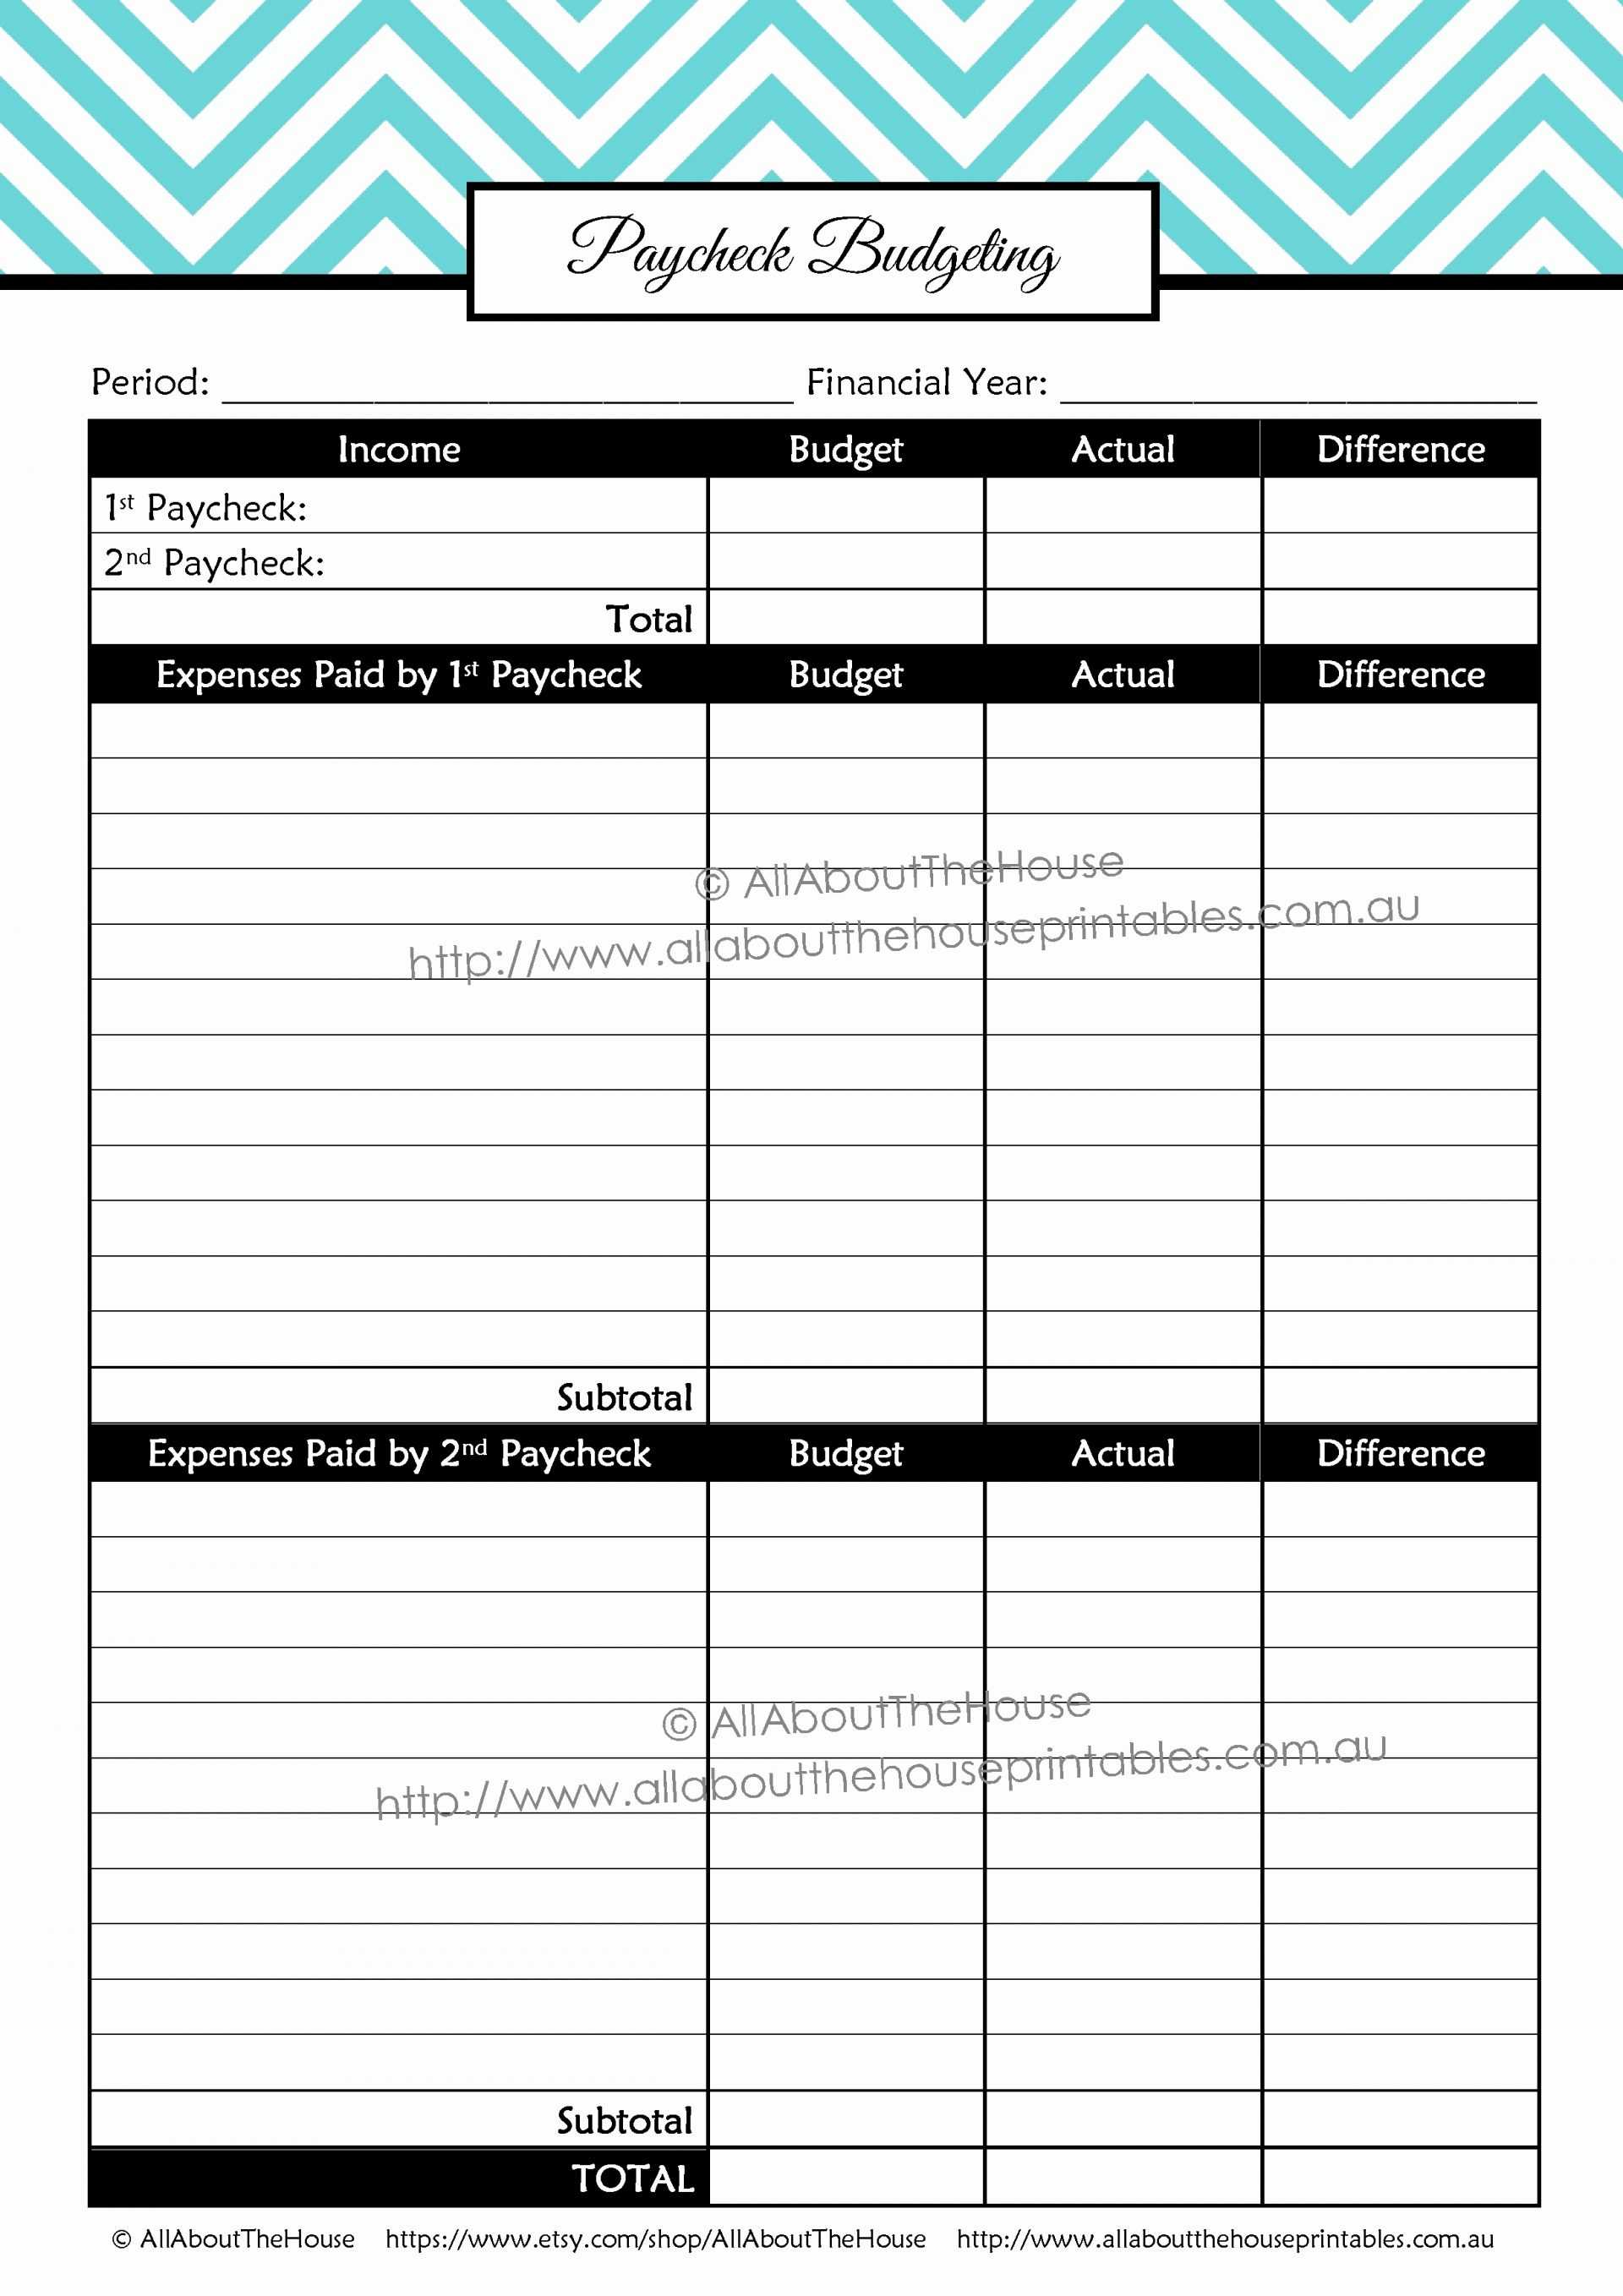 Cash Flow Budget Worksheet with Planning Bud Worksheet Ideas Monthly Food Answers Wedding